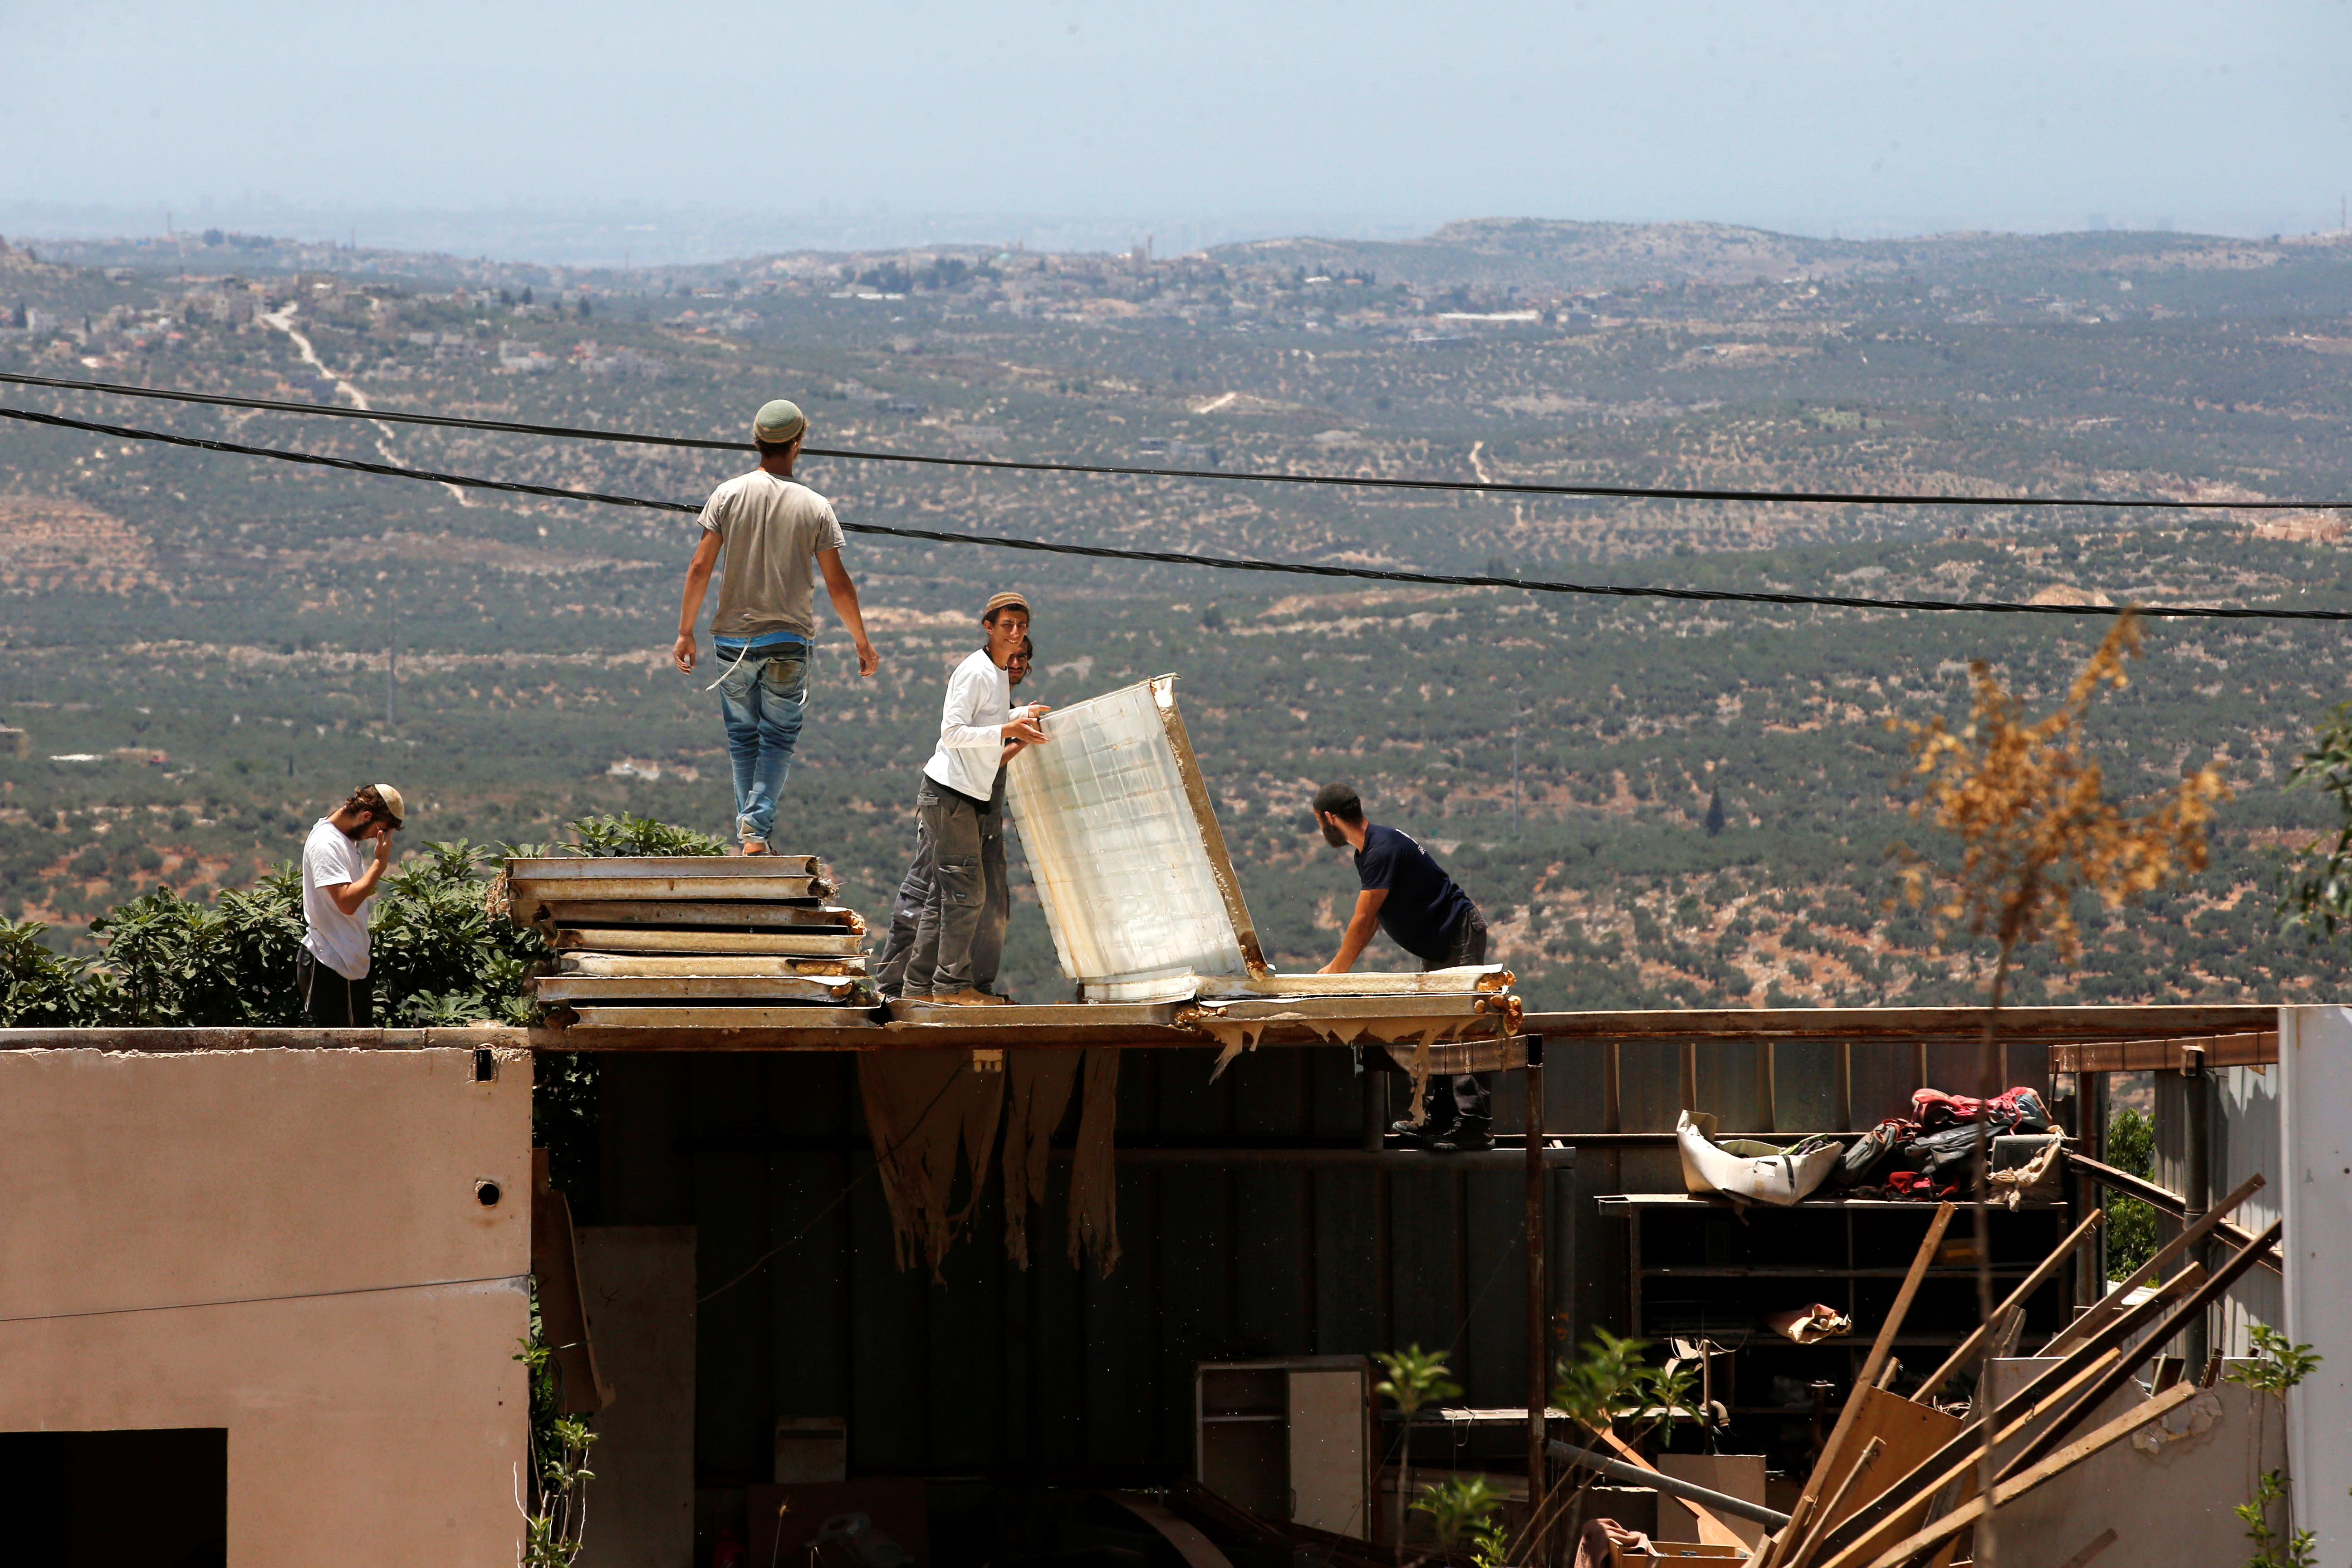 Jewish settlers dismantle parts of a structure during the eviction of buildings that an Israeli court deemed to have been built illegally in Tapuach West settlement, in the Israeli occupied West Bank, June 17, 2018.